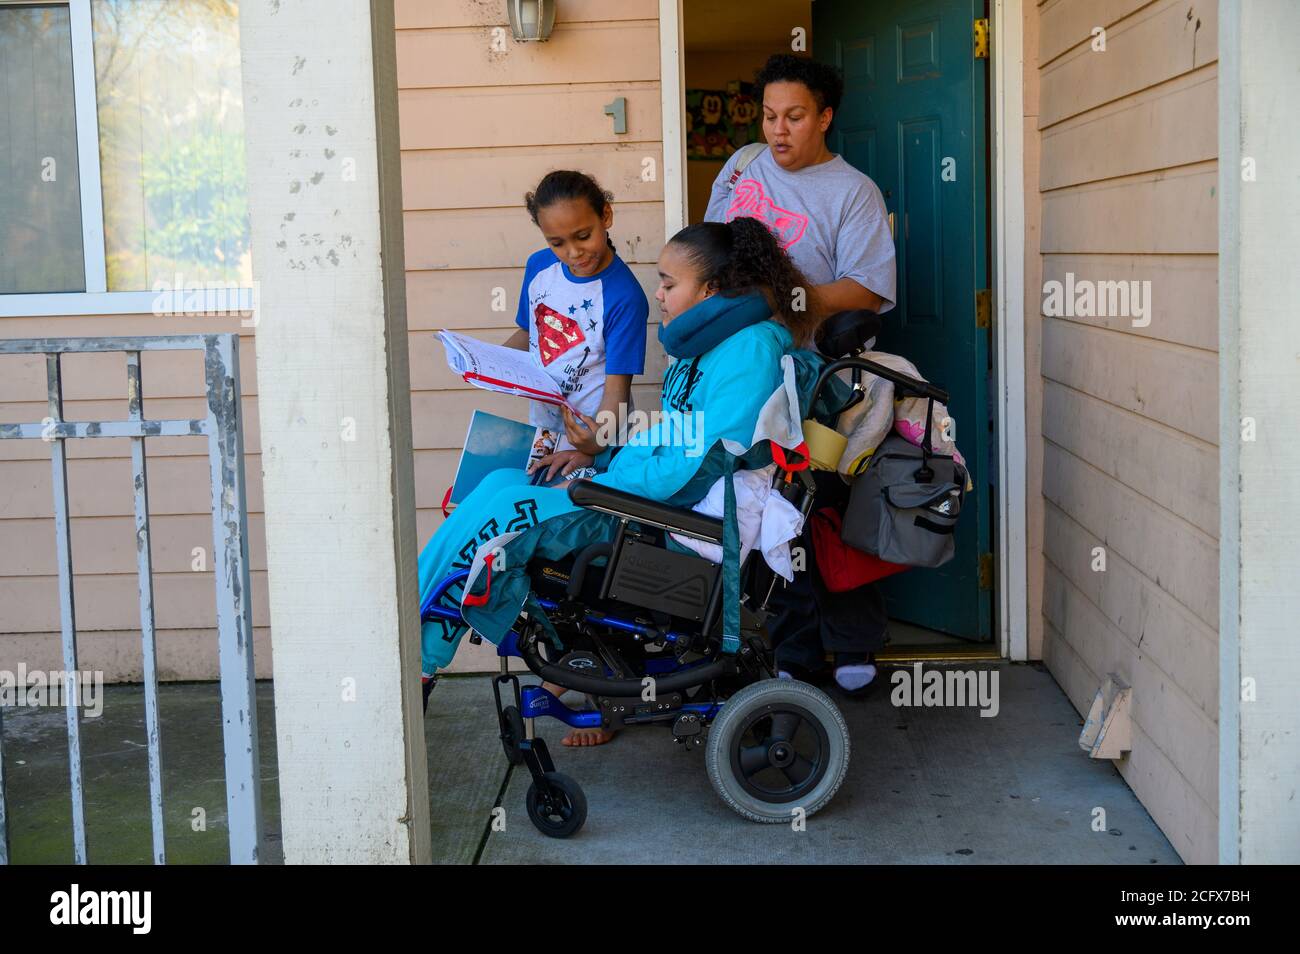 Sacramento, California, USA. 10th Feb, 2020. FELICIA CLARK pushes daughter FELICIA BRENT-VELASQUEZ'S wheelchair to catch the bus to school as her son David shows his homework to his sister. 'We moved her here and been trying to figure out her new way of life. What that means is getting her back into school. All of my children have to go to school, education is key. I want her to do whatever she can with her brain. She's got full brain function. I don't want her to waste it, ' she said. Her daughter died in June 2020 after suffering a stroke and aneurysm. (Credit Image: © Renee C. Byer/Sacram Stock Photo